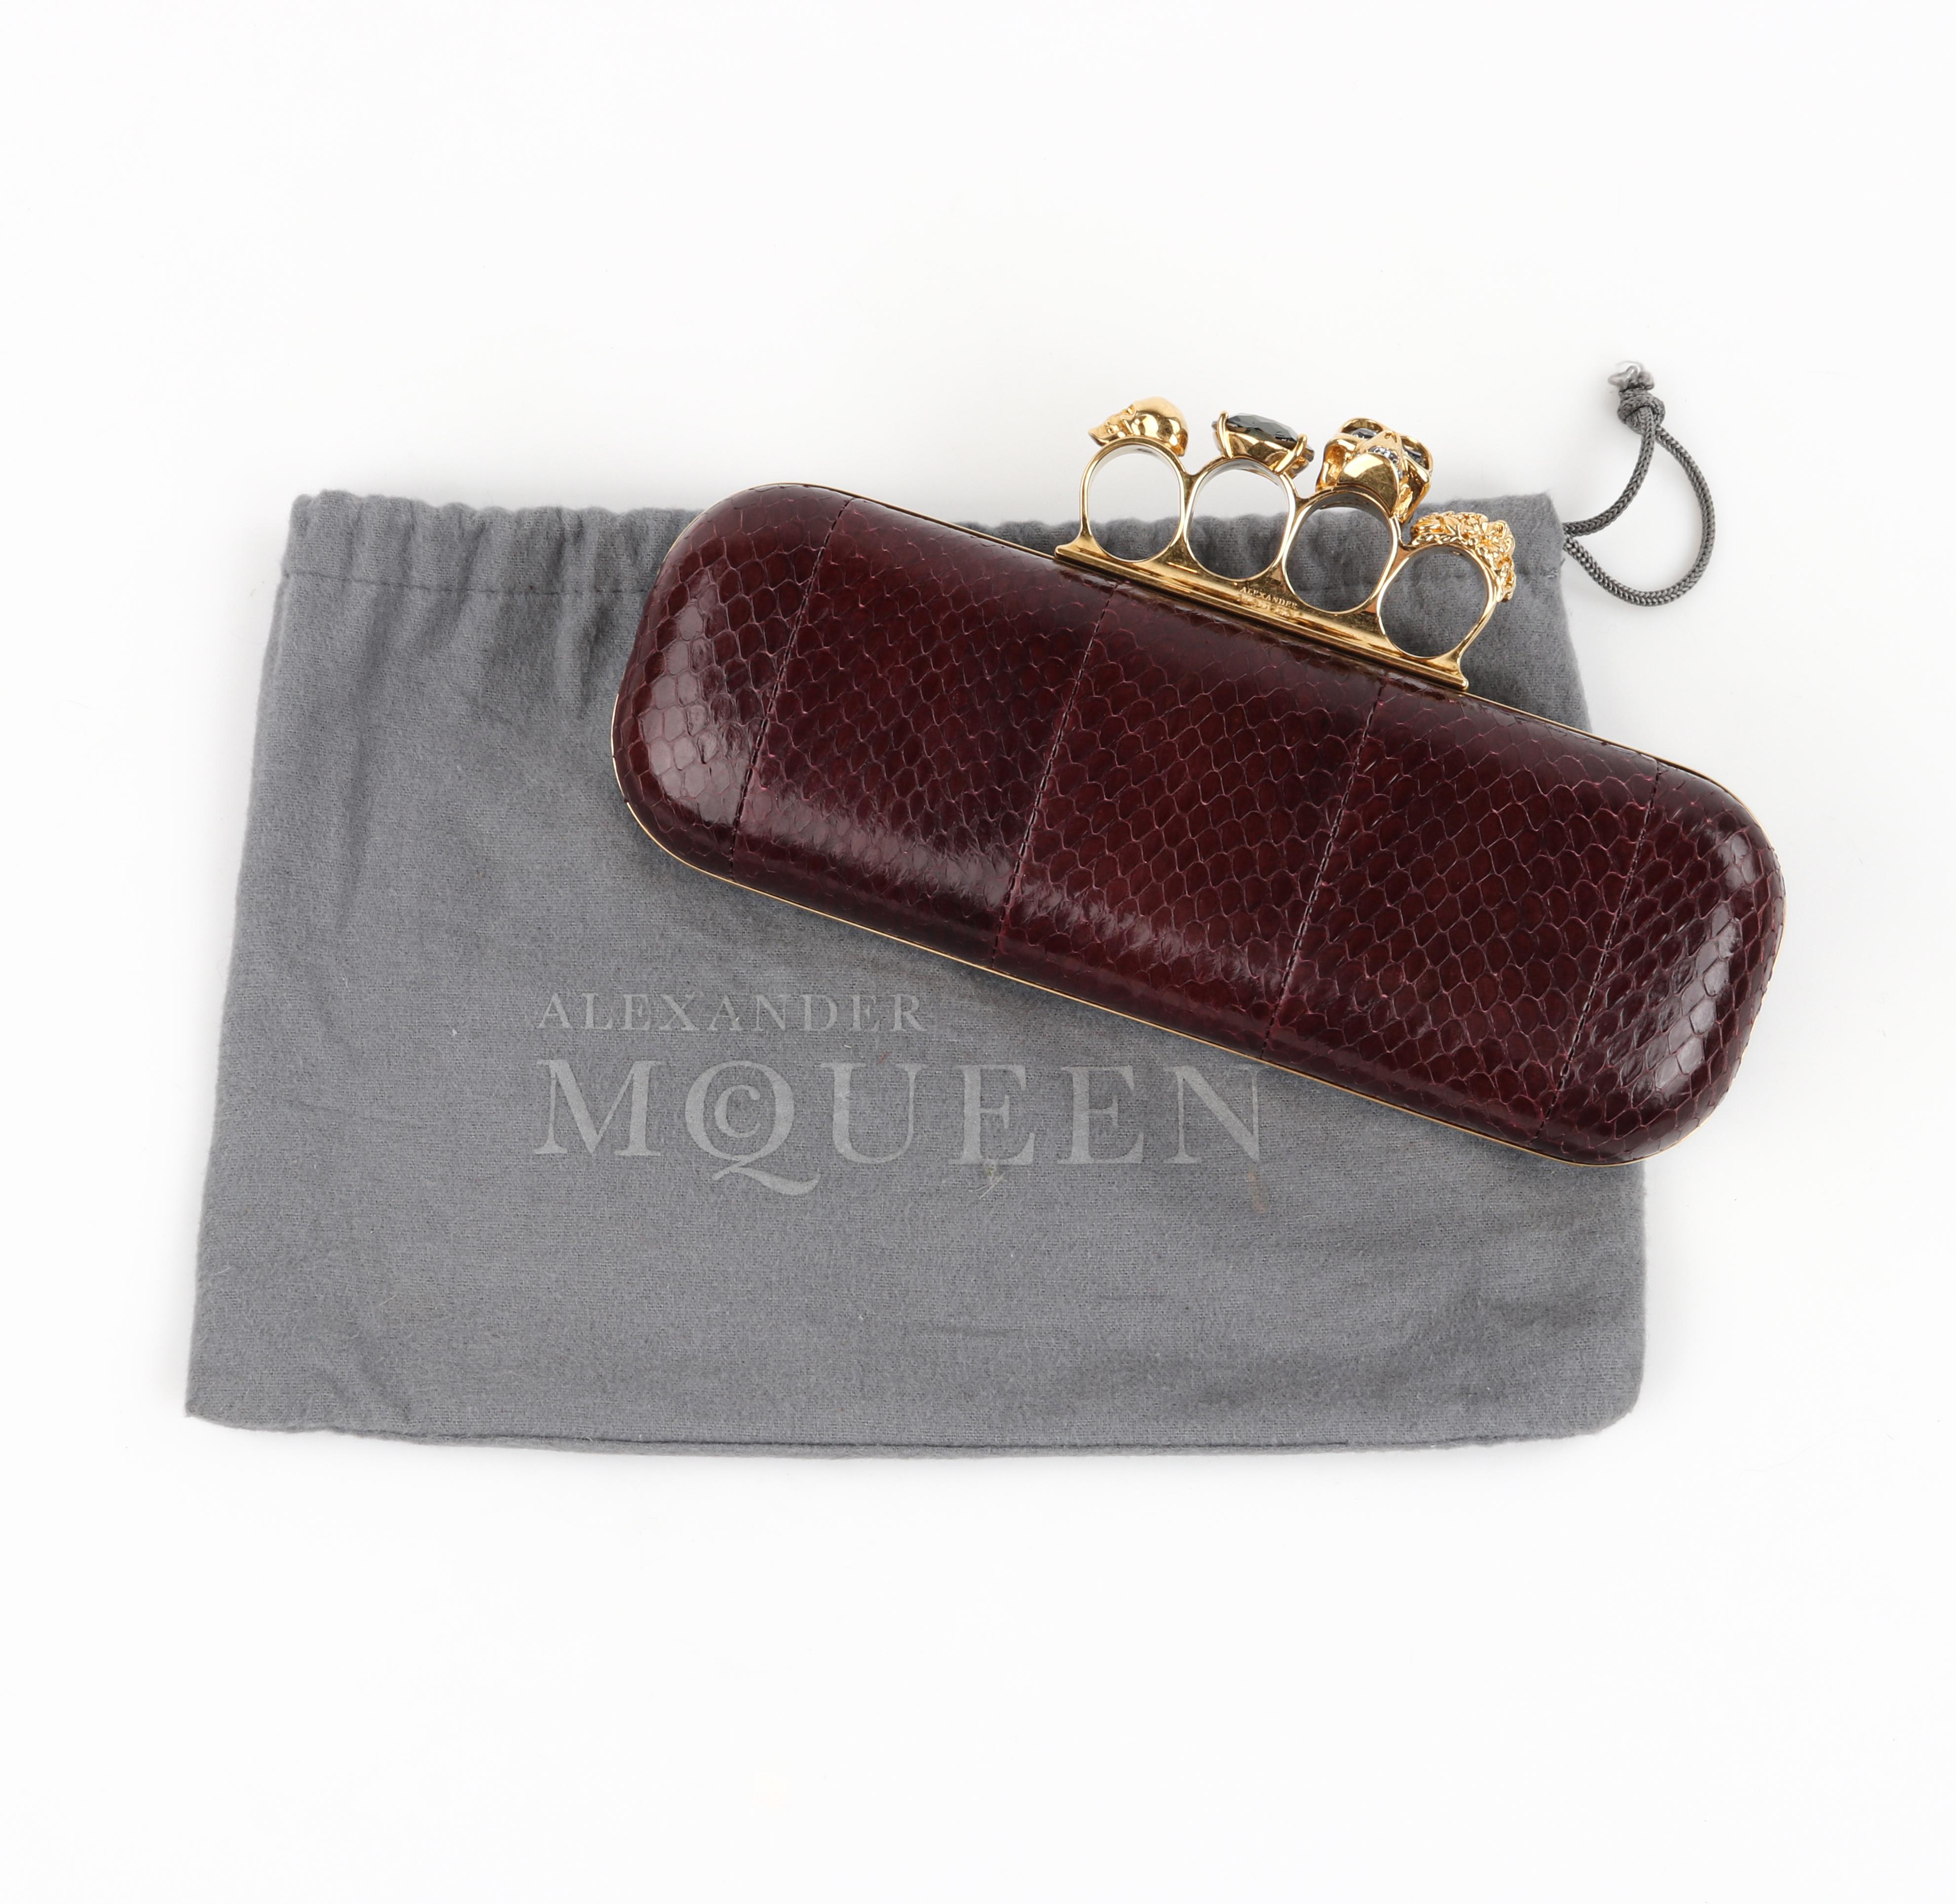 ALEXANDER McQUEEN Maroon Python Snakeskin Skull Knuckle Ring Duster Box Clutch 

Brand / Manufacturer: Alexander McQueen
Style: Clutch
Color(s): Maroon exterior, Gold hardware, Gray Crystal Stones, Black interior
Unmarked Fabric (feel of): Python